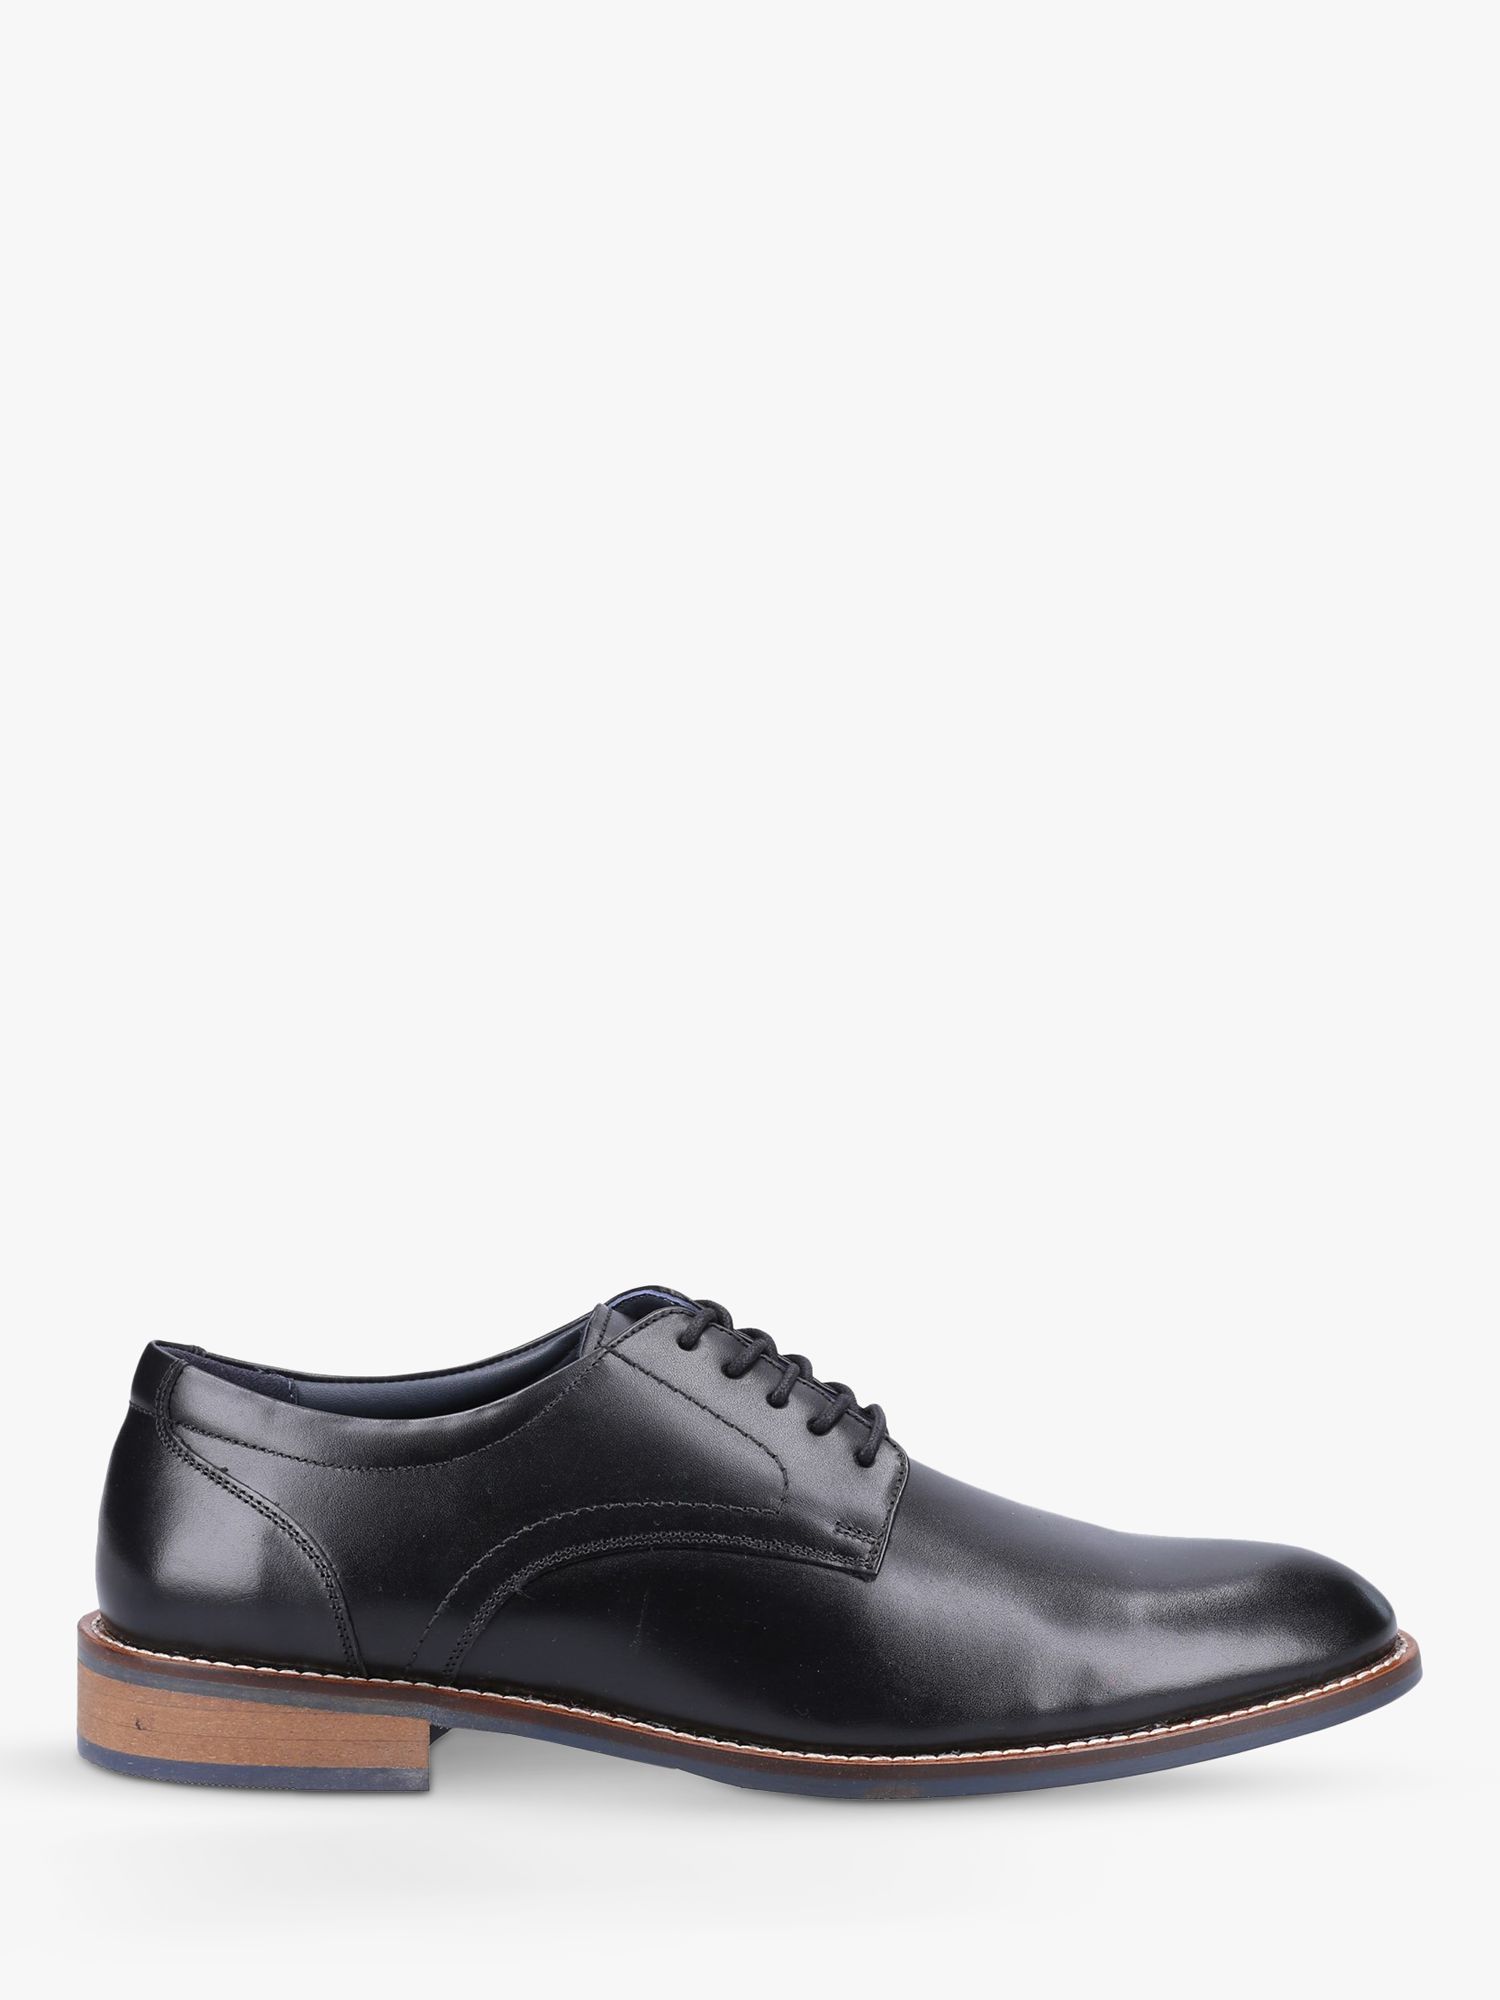 Hush Puppies Damien Leather Derby Shoes, Black at John Lewis & Partners